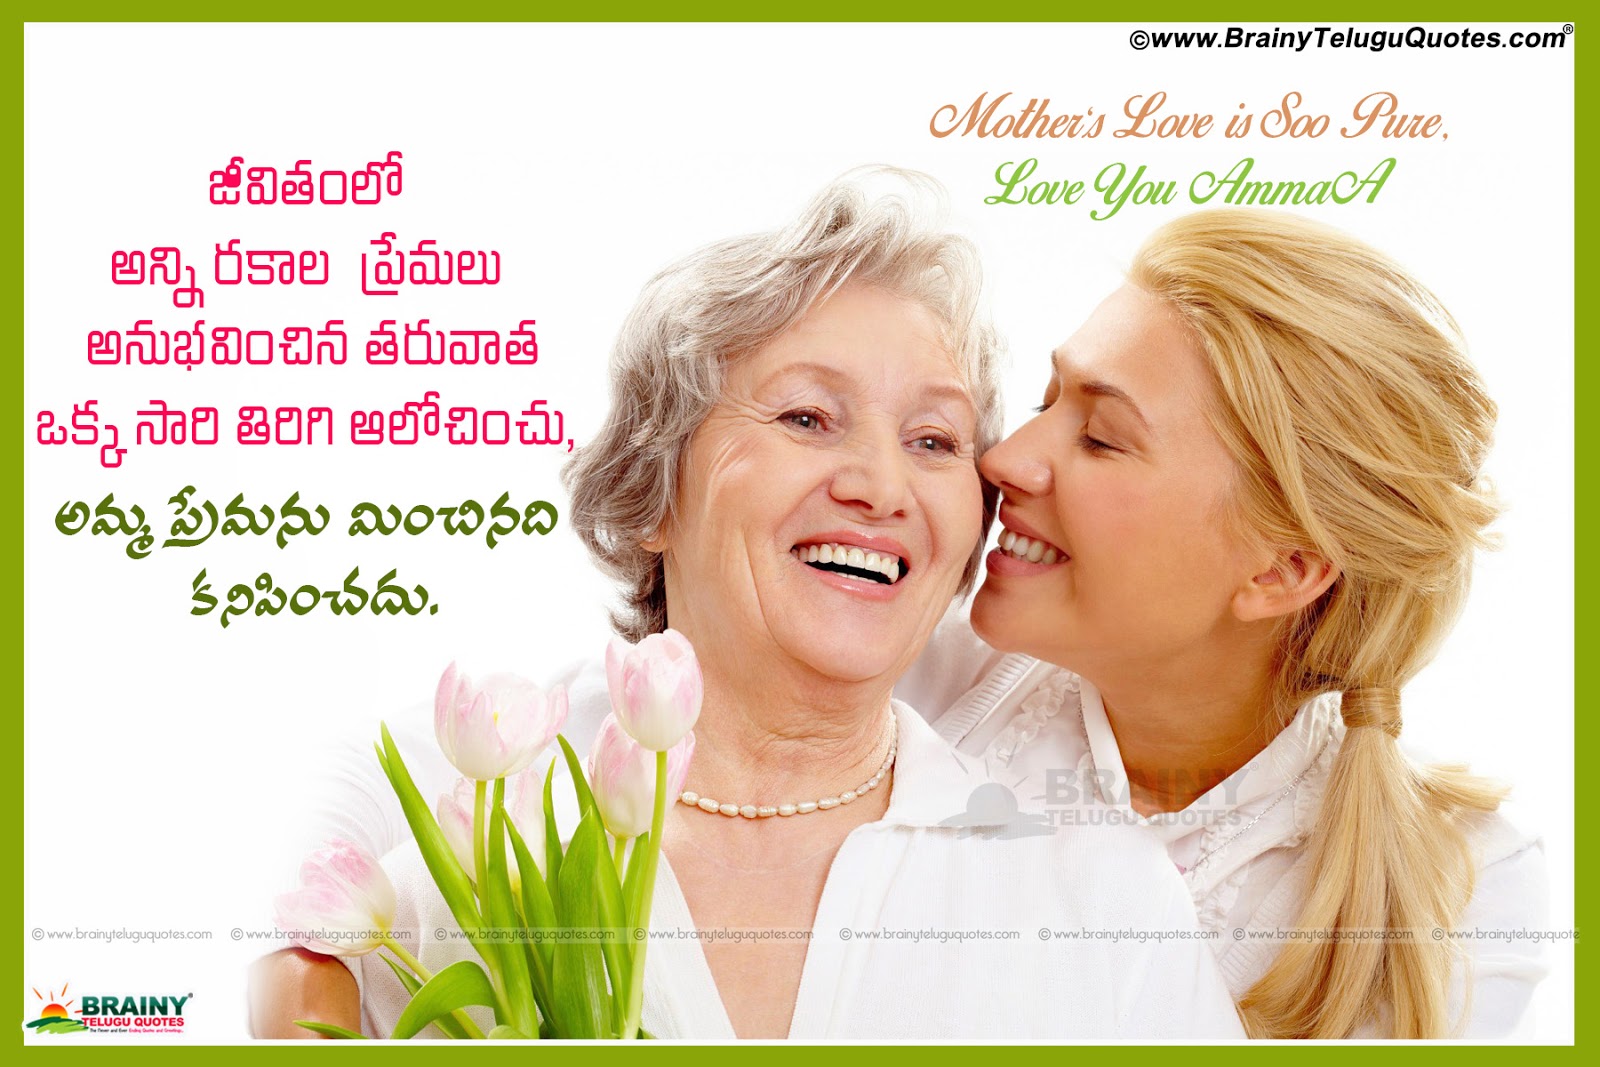 Best Inspirational Mother Quotations and Messages in